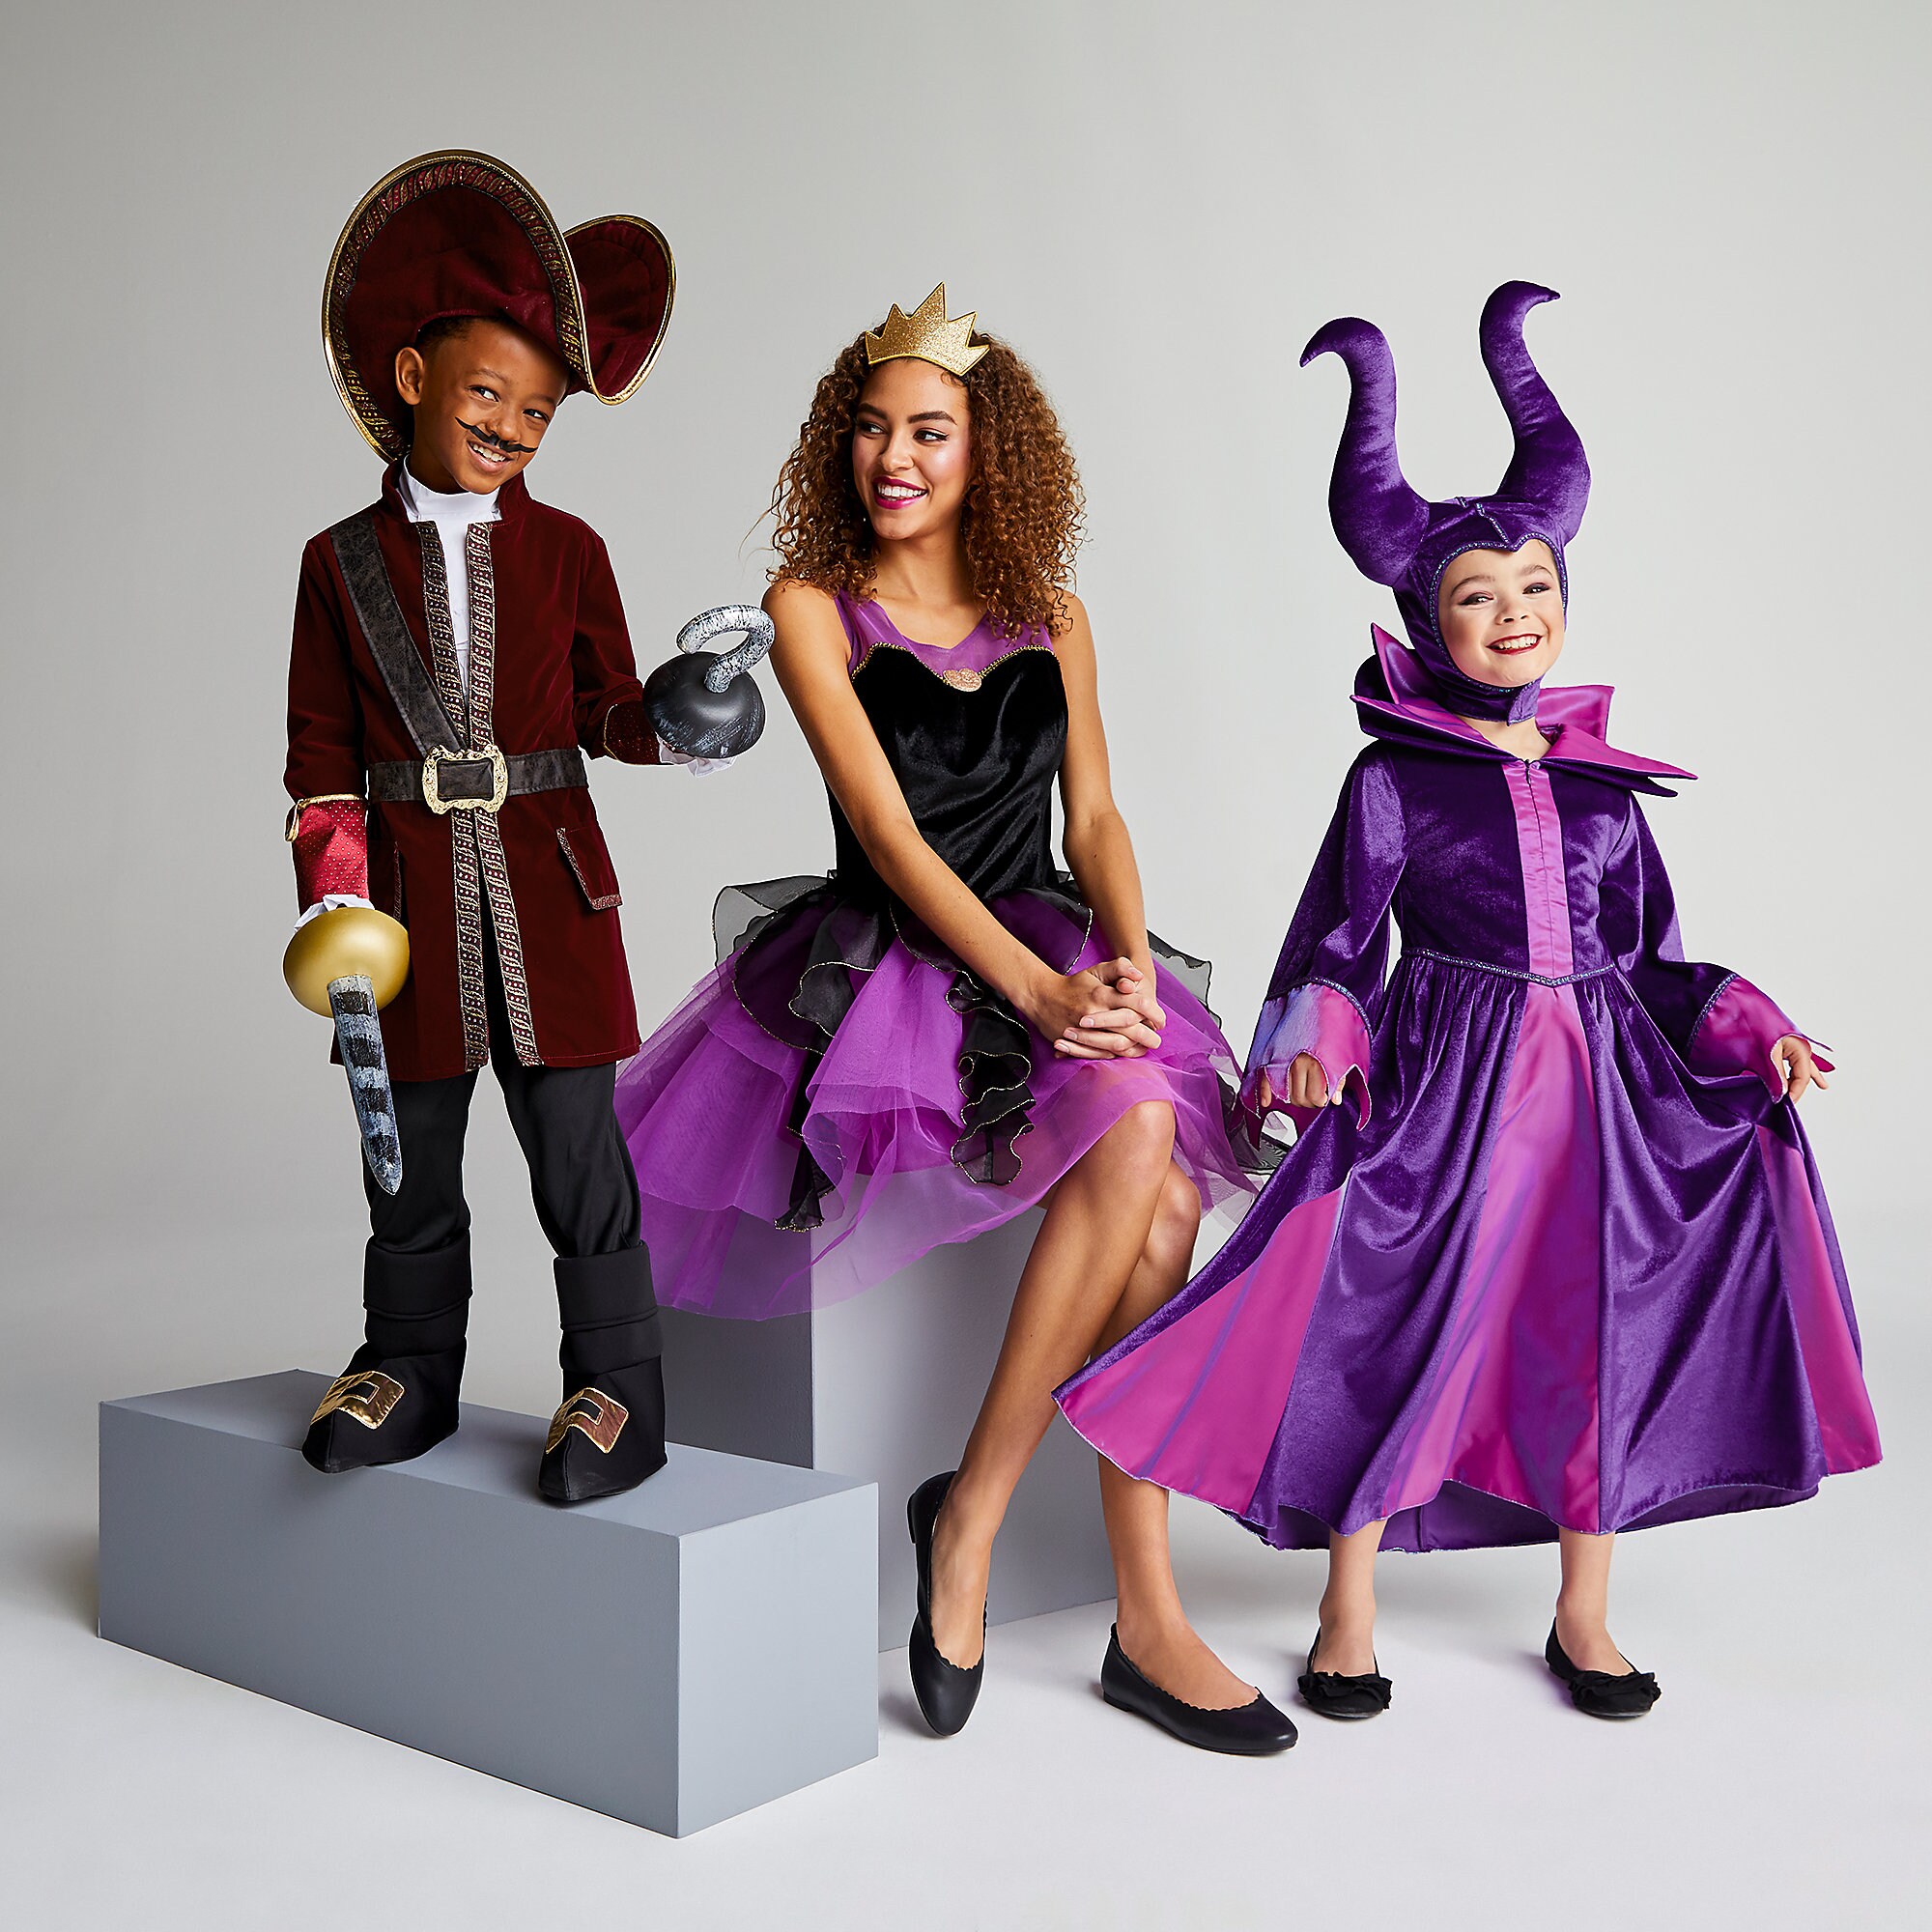 Maleficent Costume for Kids - Sleeping Beauty